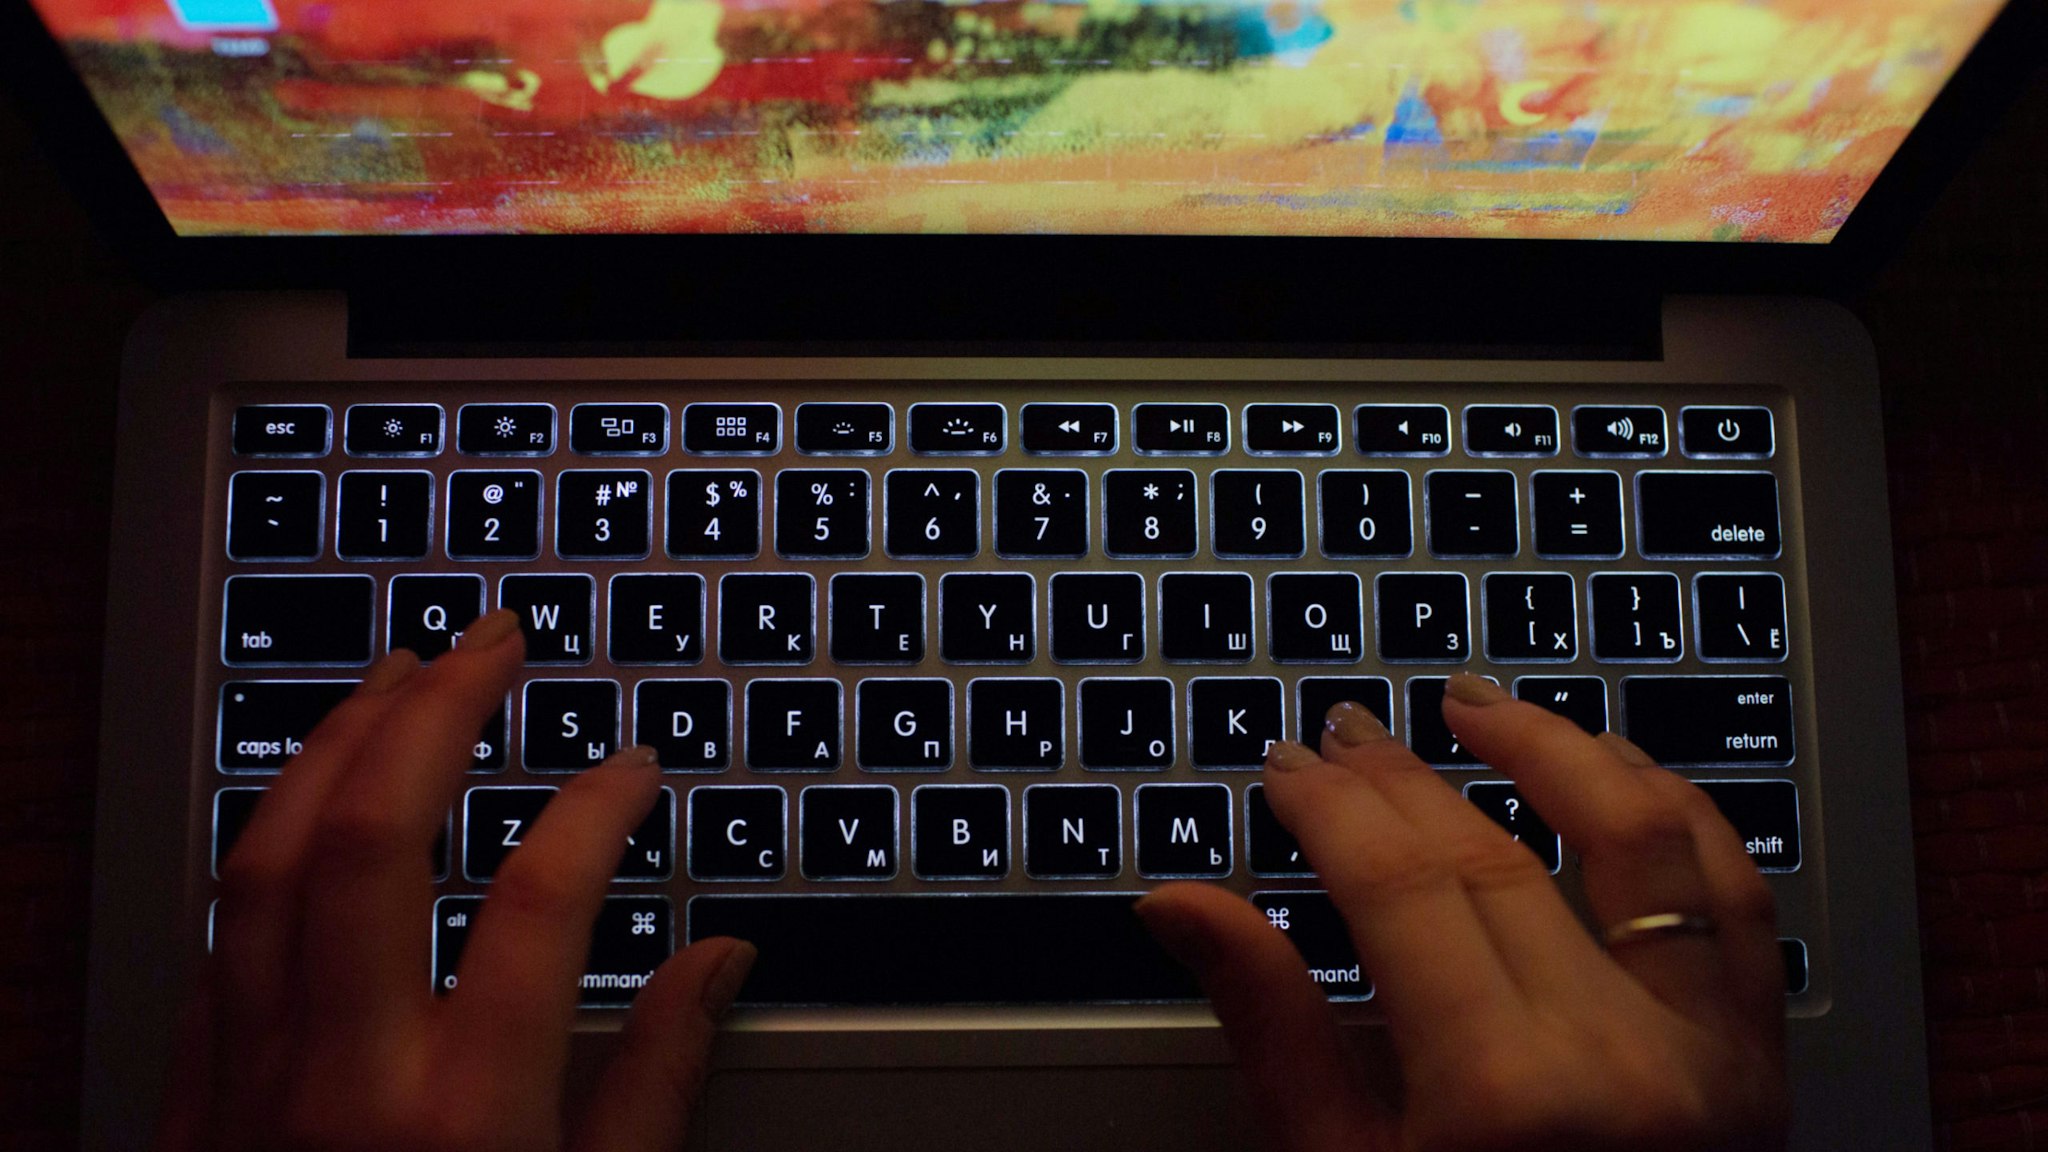 A person uses a laptop computer with illuminated English and Russian Cyrillic character keys in this arranged photograph in Moscow, Russia, on Thursday, March 14, 2019.